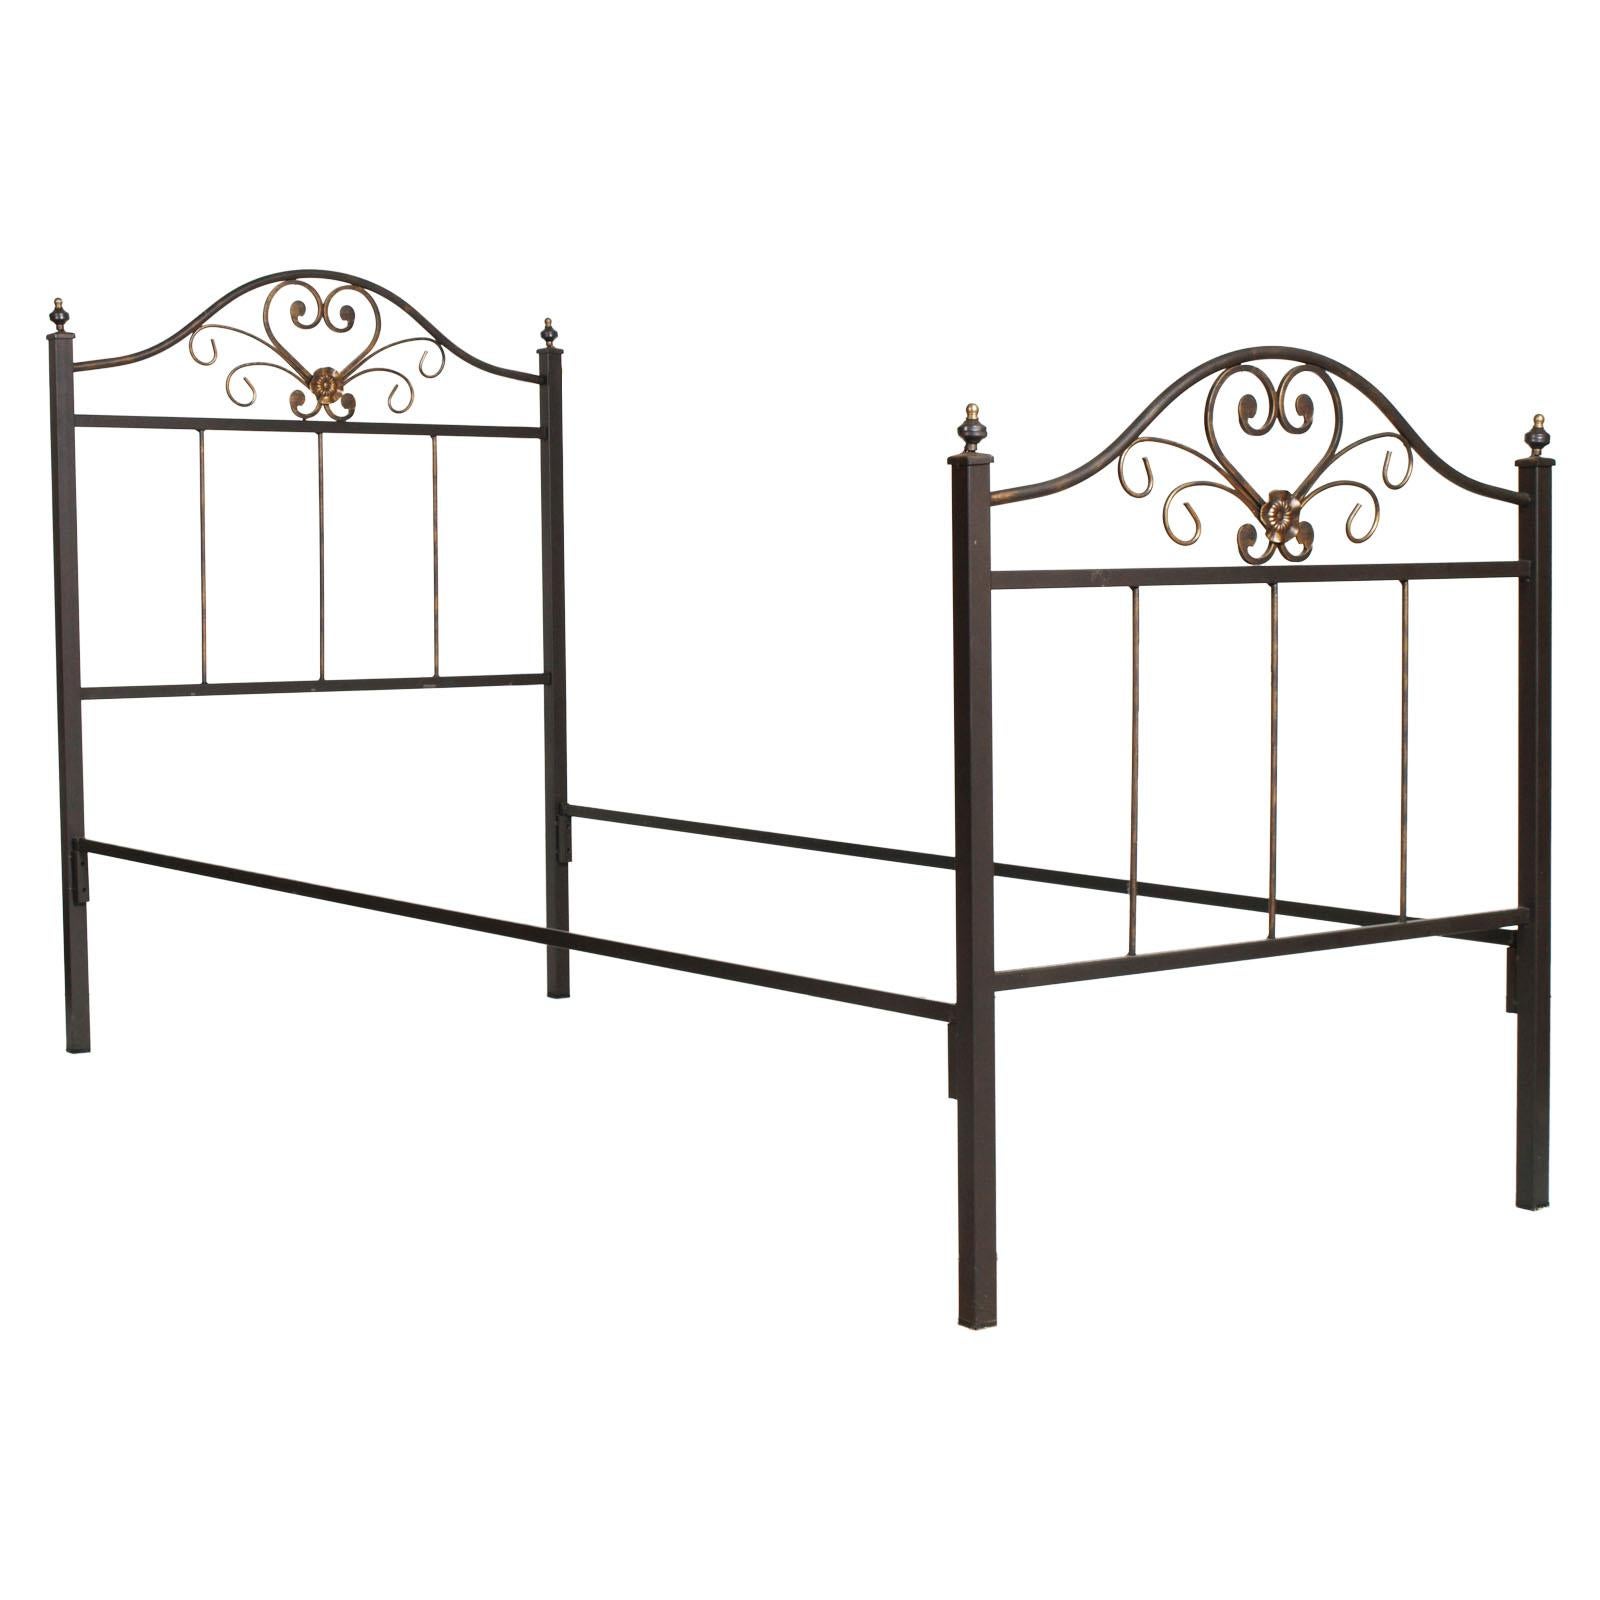 1960s Italian Art Nouveau Single Bed in Painted Wrought Iron, Golden Parts For Sale